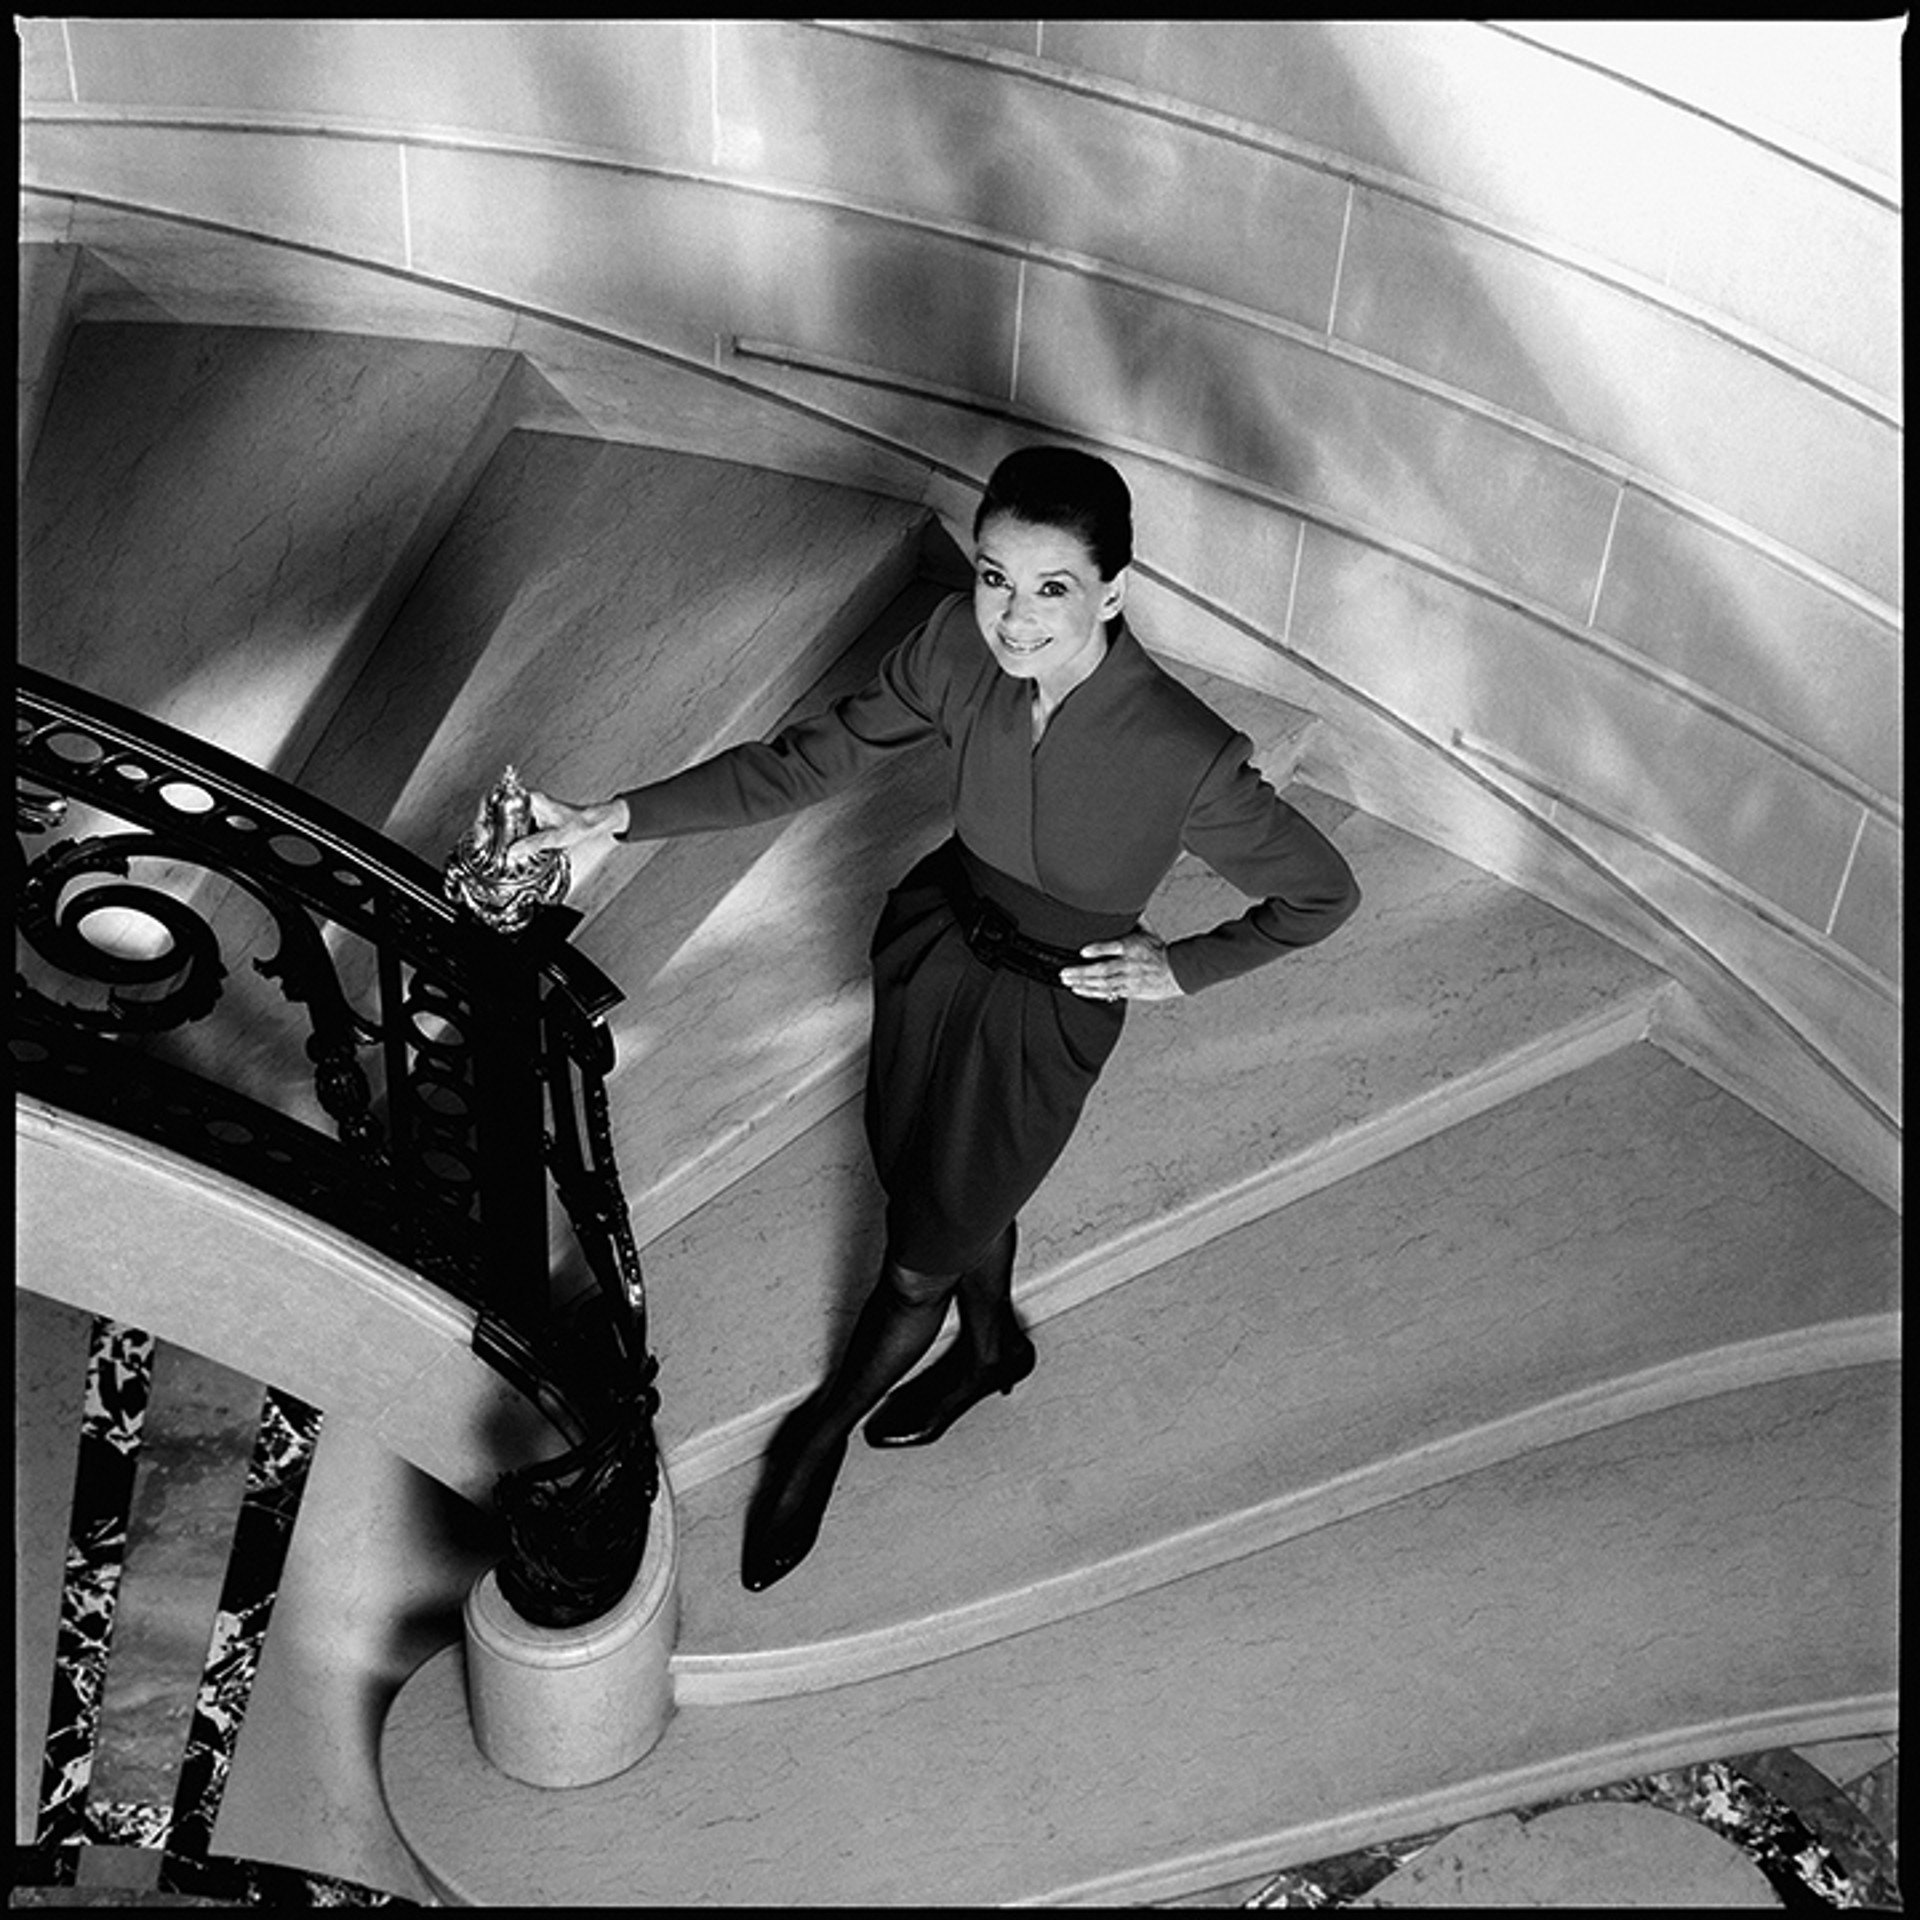 89003 Audrey Hepburn Smiling in Stairway BW by Timothy White